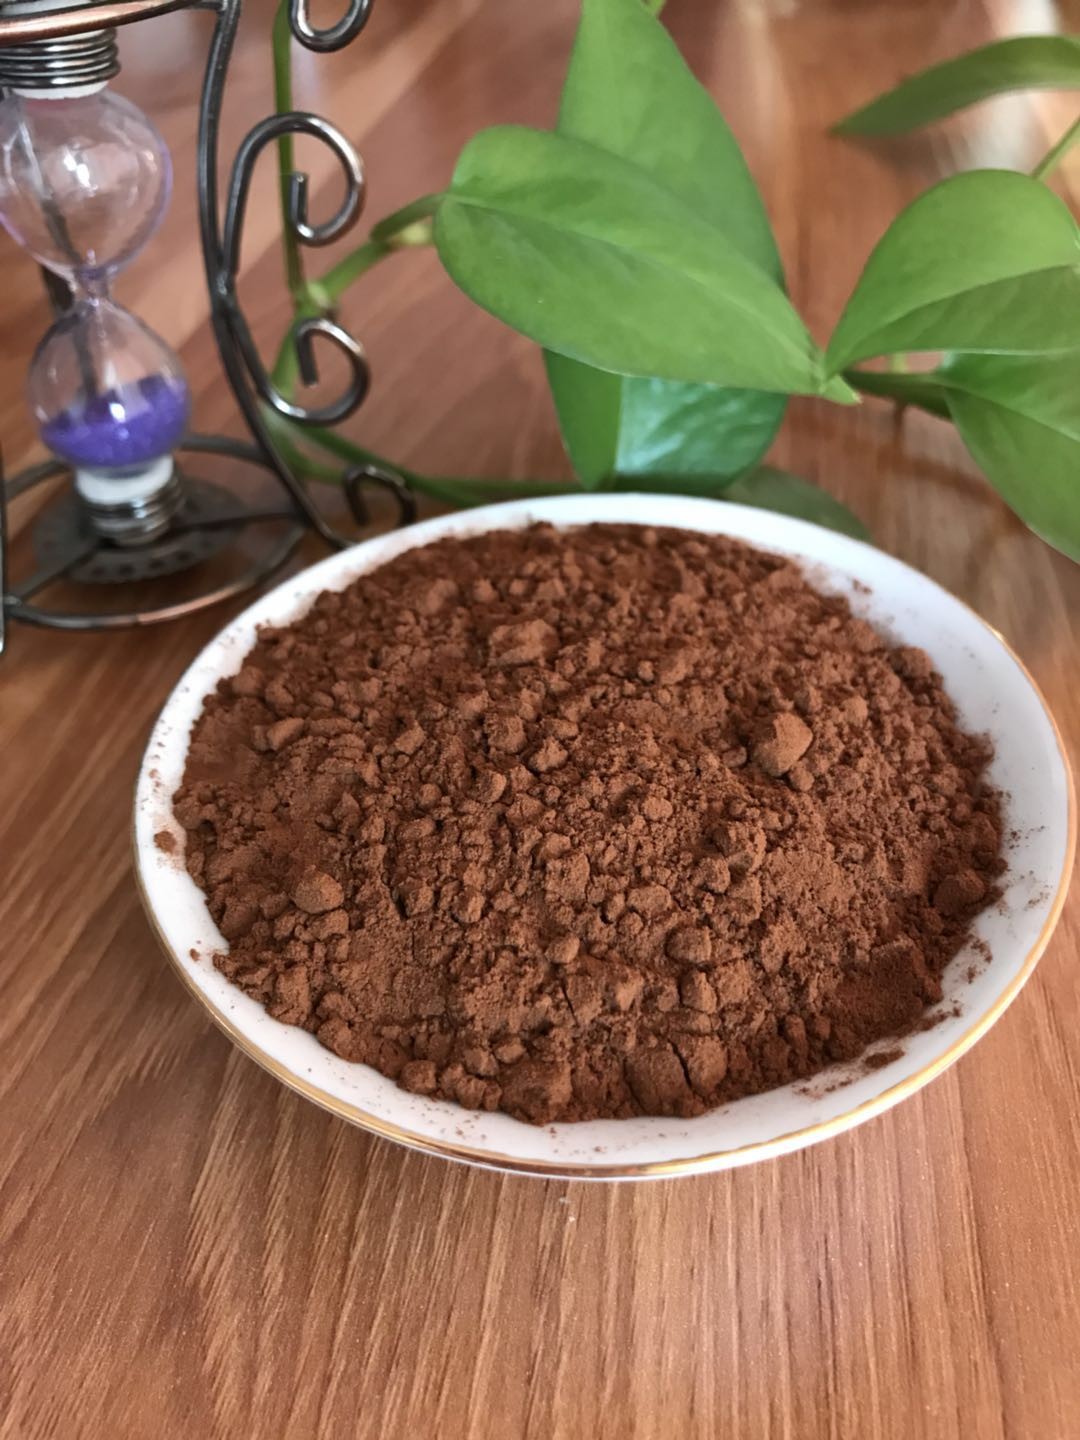 Medium Fat Alkalized Dark Cocoa Powder Confectionery Raw Material IS 022000 ISO 9001